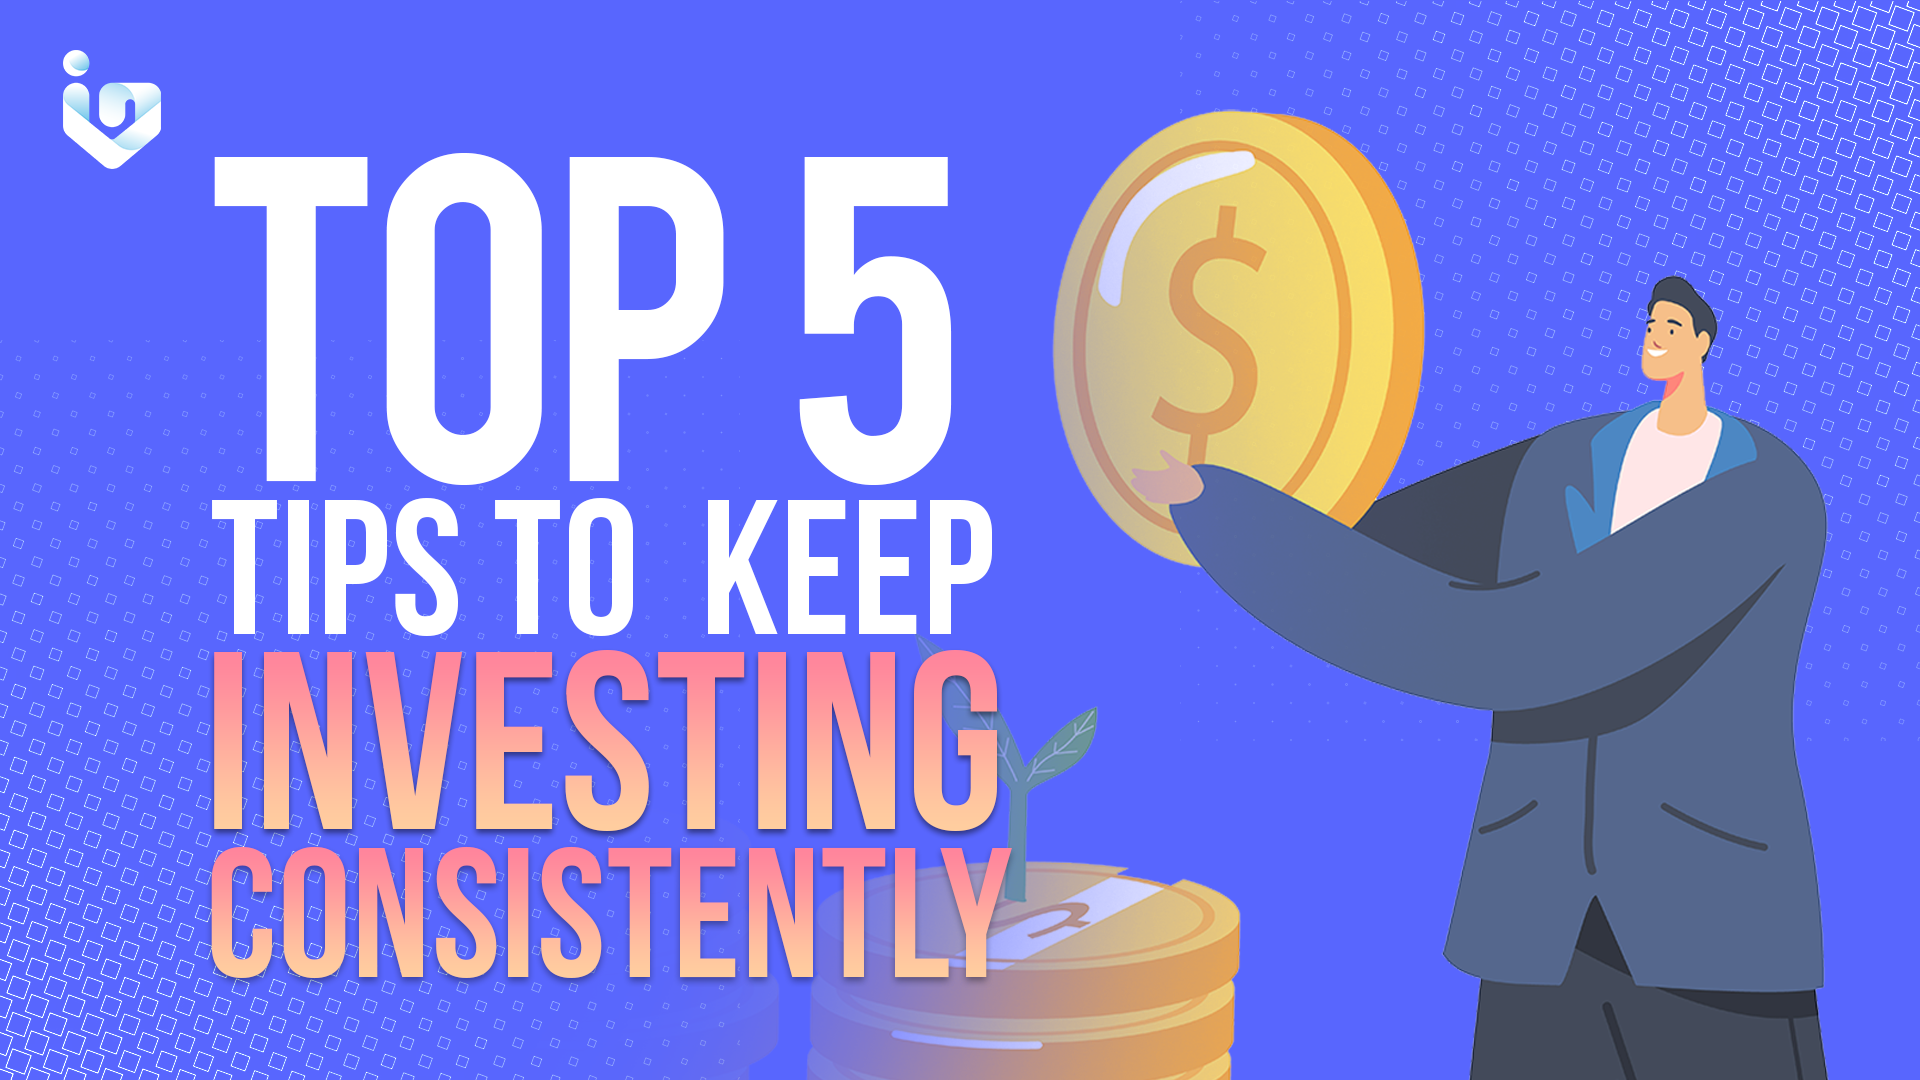 Top 5 Tips to Keep Investing Consistently